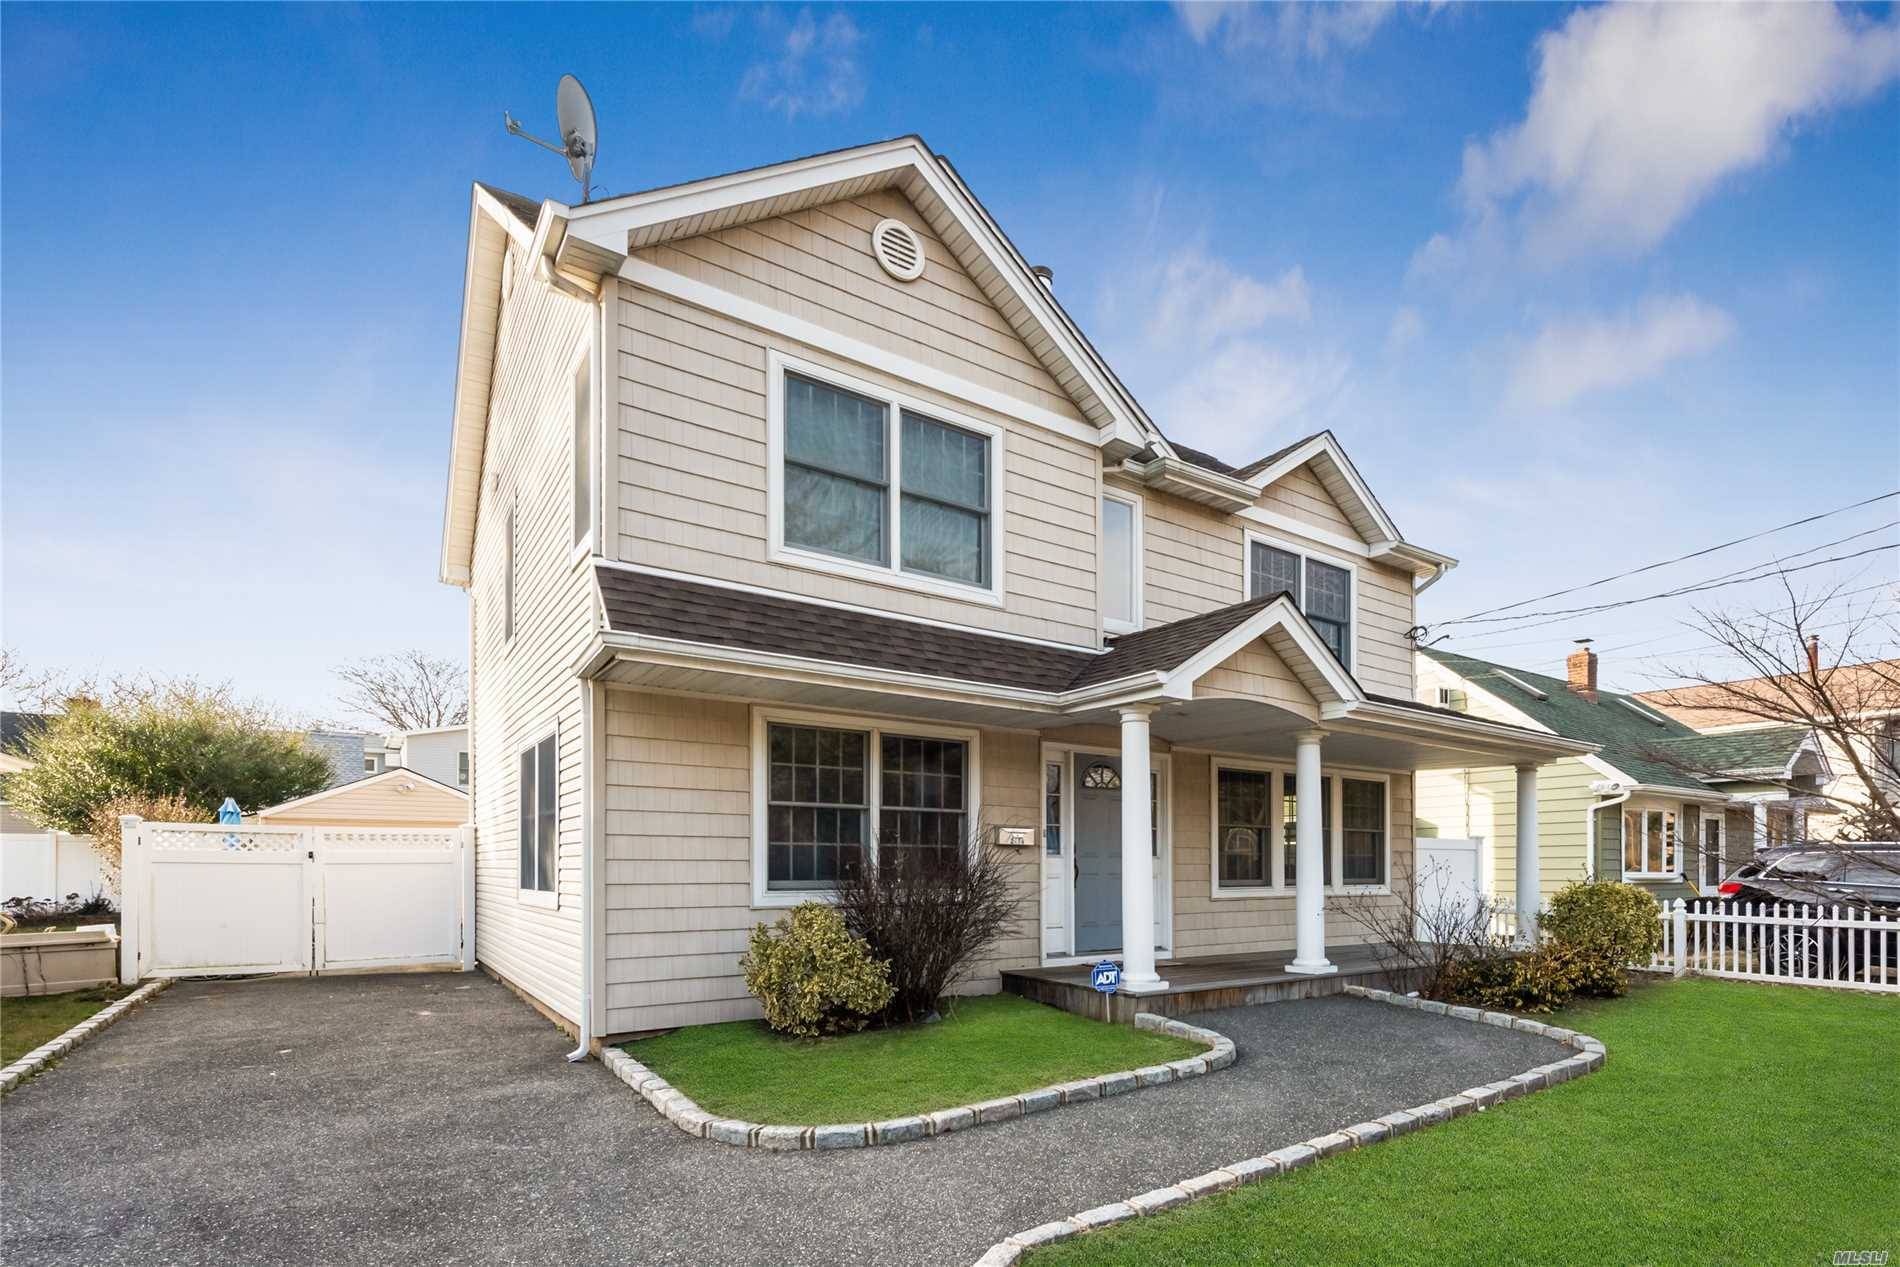 Beautiful Colonial On A Quiet Mid Block Location In The Mandalay Section Of Award Winning Wantagh Schools.